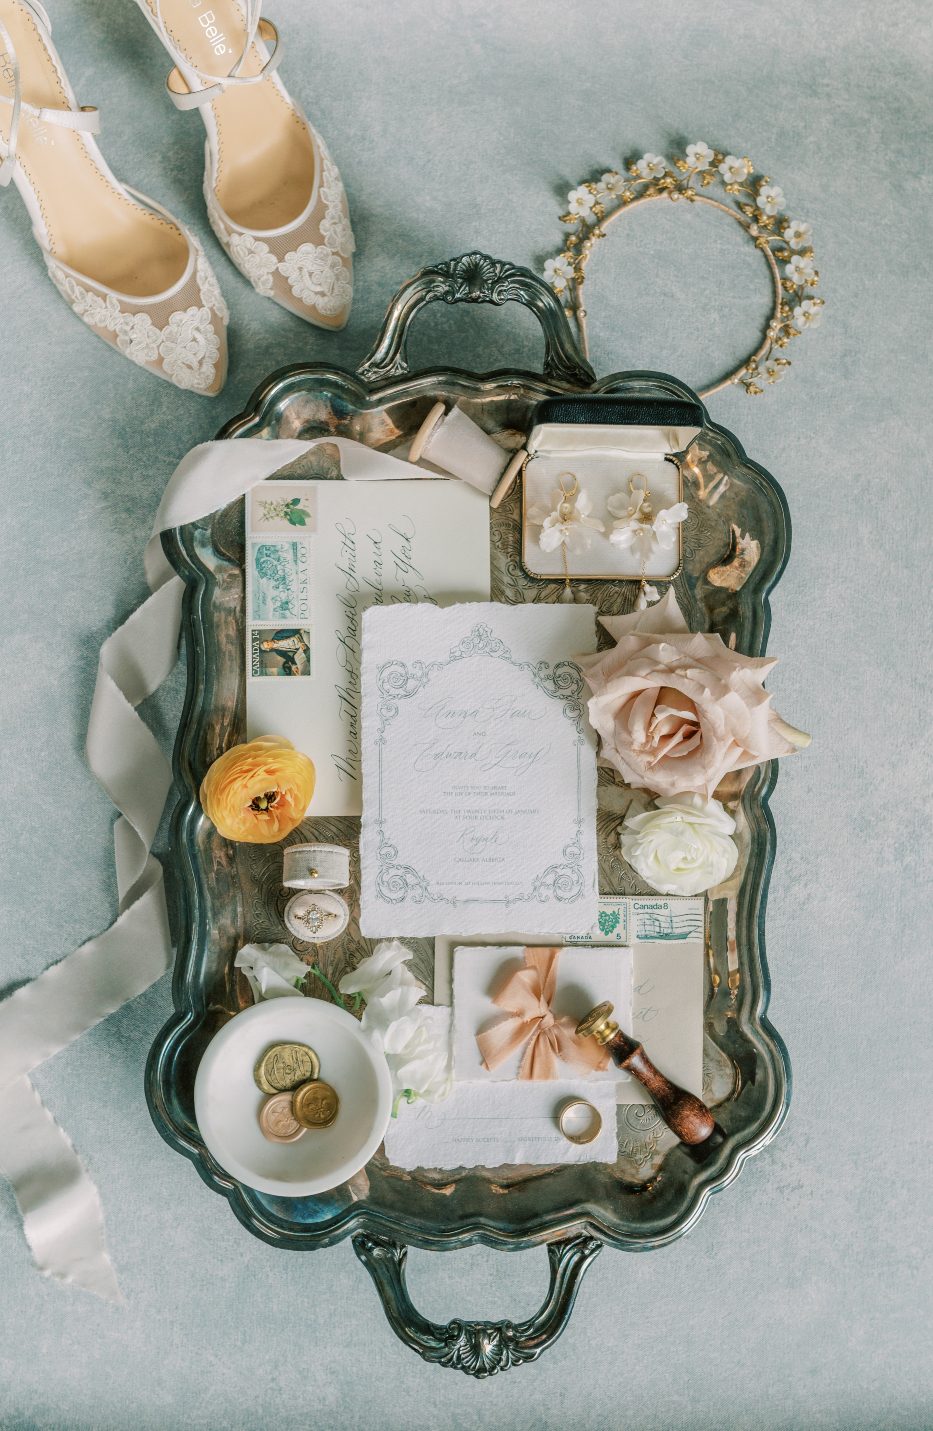 A flat lay shot of many detail pieces for the photoshoot including the wedding invitation, wax seals, wedding ring, jewelry and shoes accented with pretty blooms